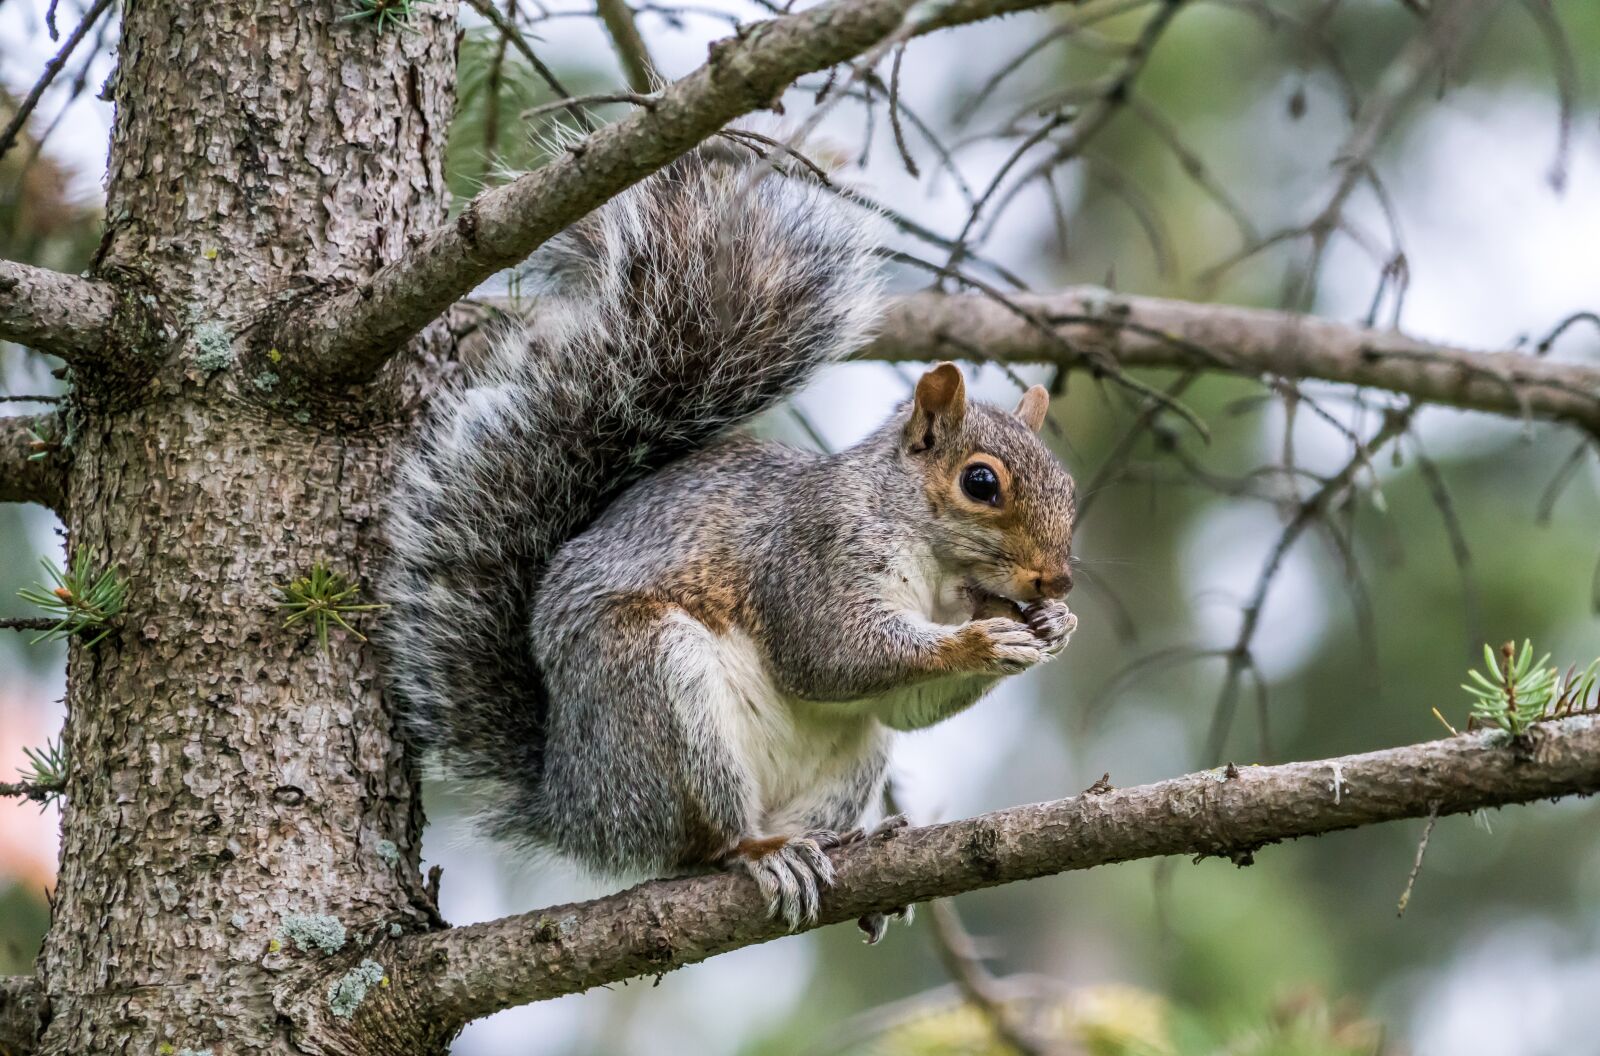 Sony a7R II sample photo. Squirrel, eating, nature photography